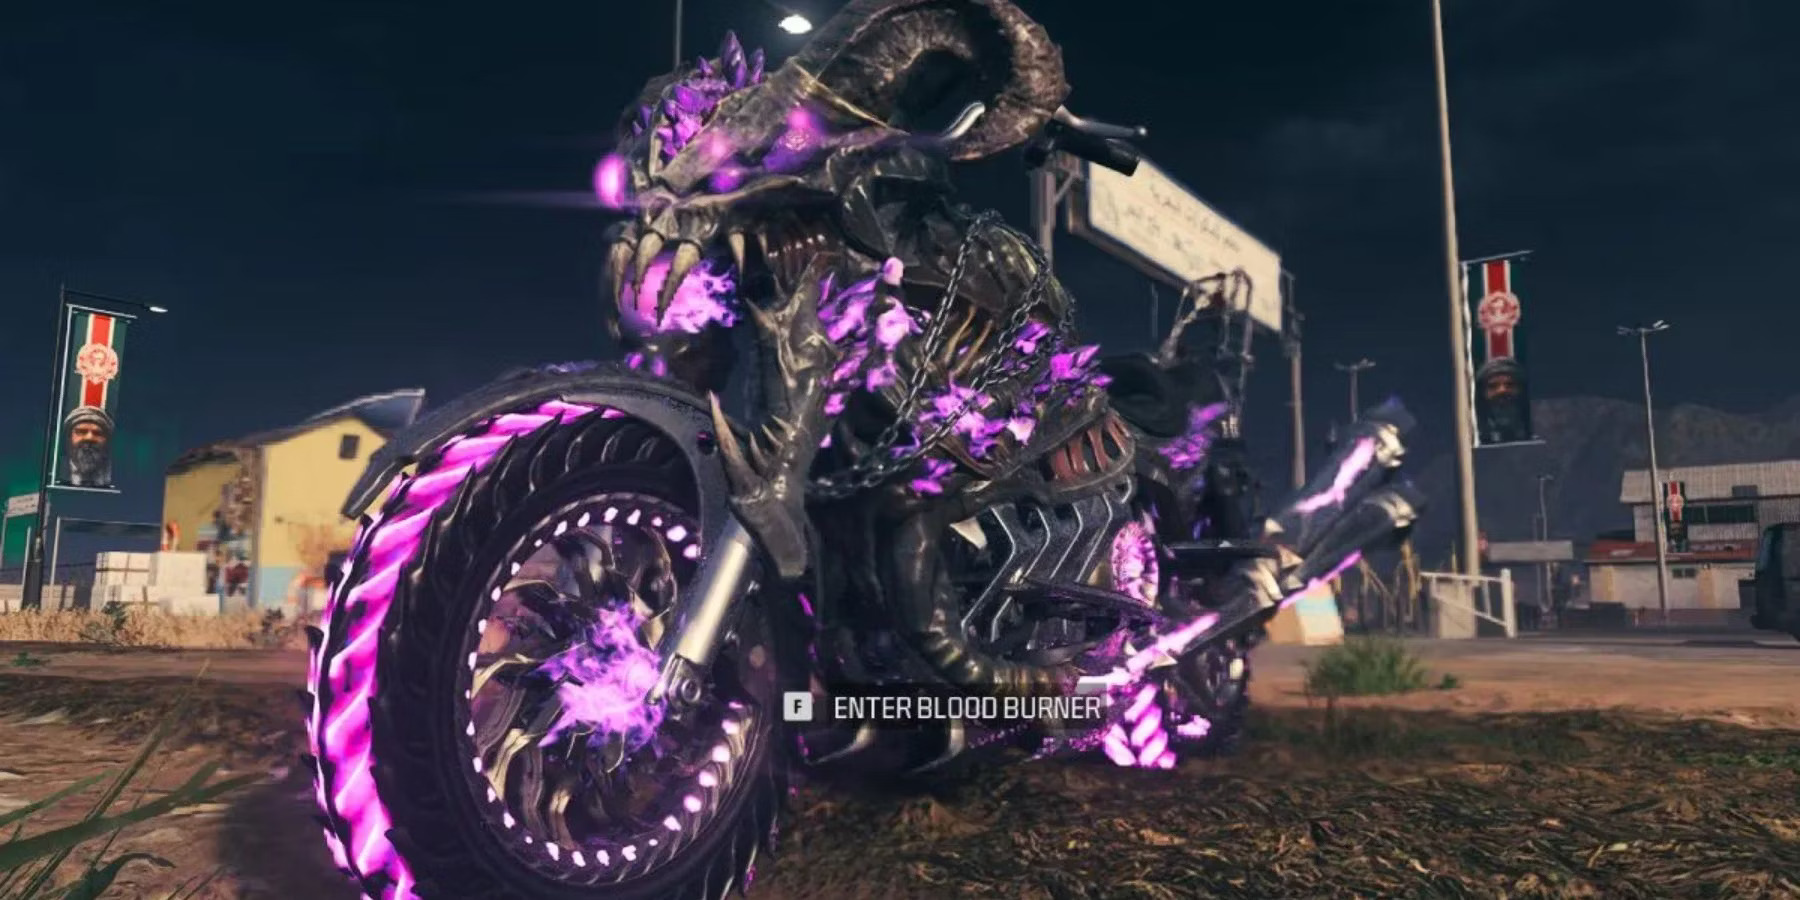 Where to find blood burner wonder vehicle in mw3 zombies?